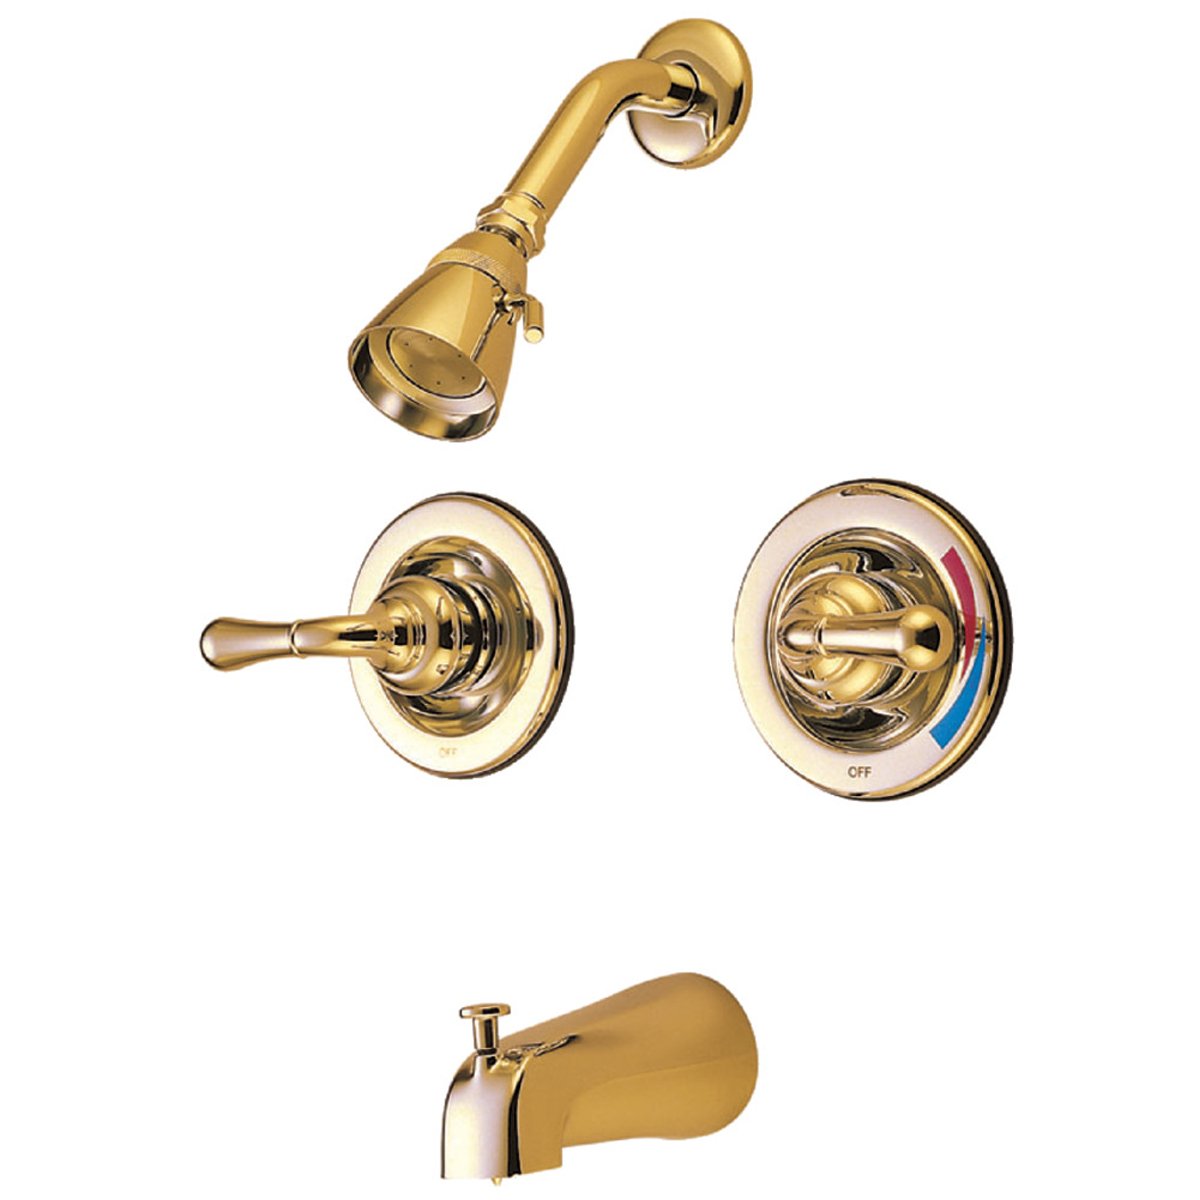 Kingston Brass Magellan Twin Handles Tub and Shower Faucet